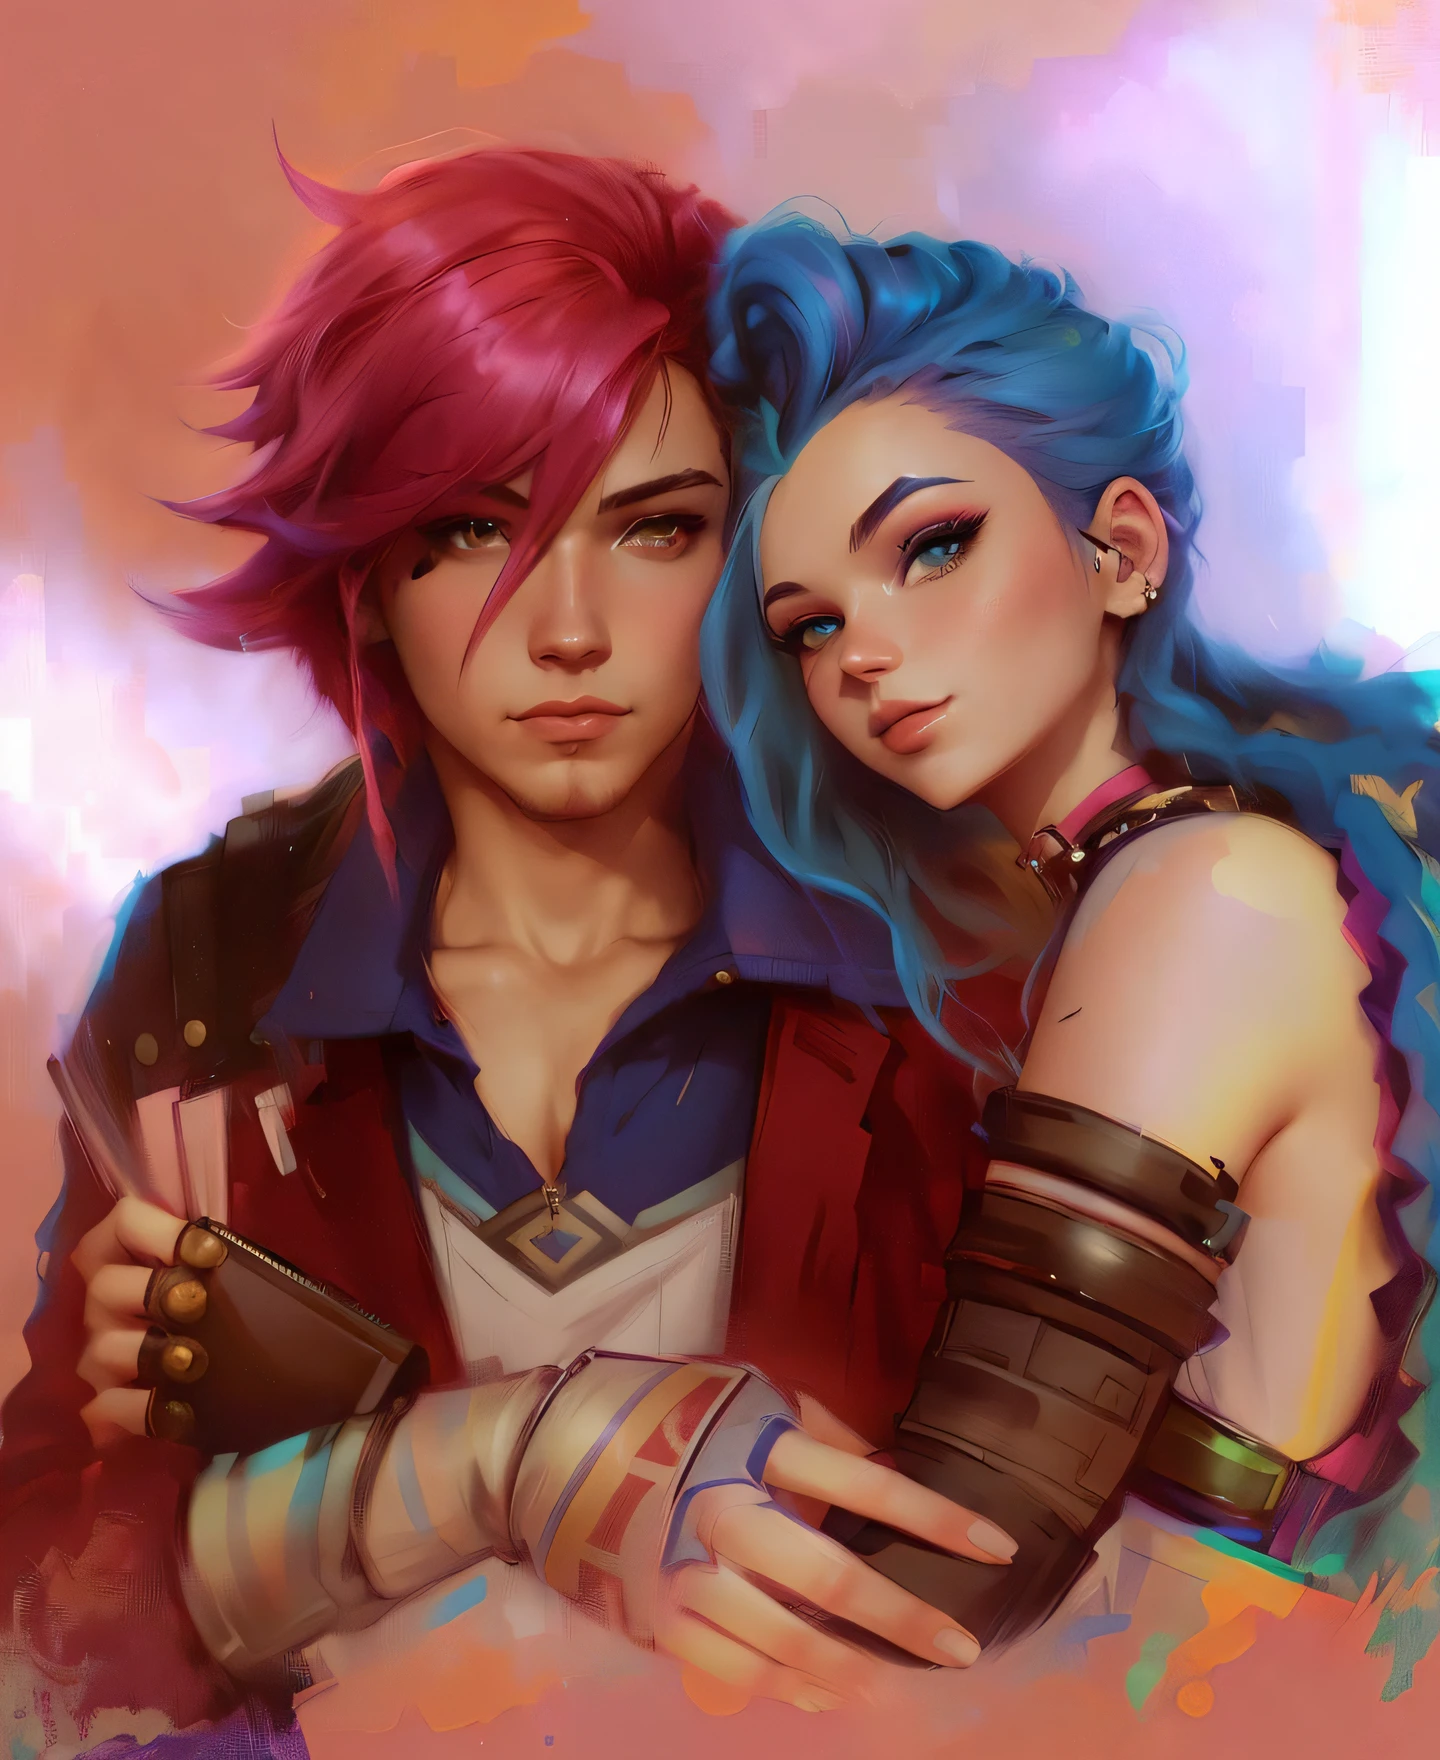 A painting of two women with blue hair and pink hair, lois van baarle and rossdraws, jazza and rossdraws, artgerm and lois van baarle, artgerm and genzoman, red and cyan, anato finnstark and alena aenami, rhads and lois van baarle, rossdraws and jazza